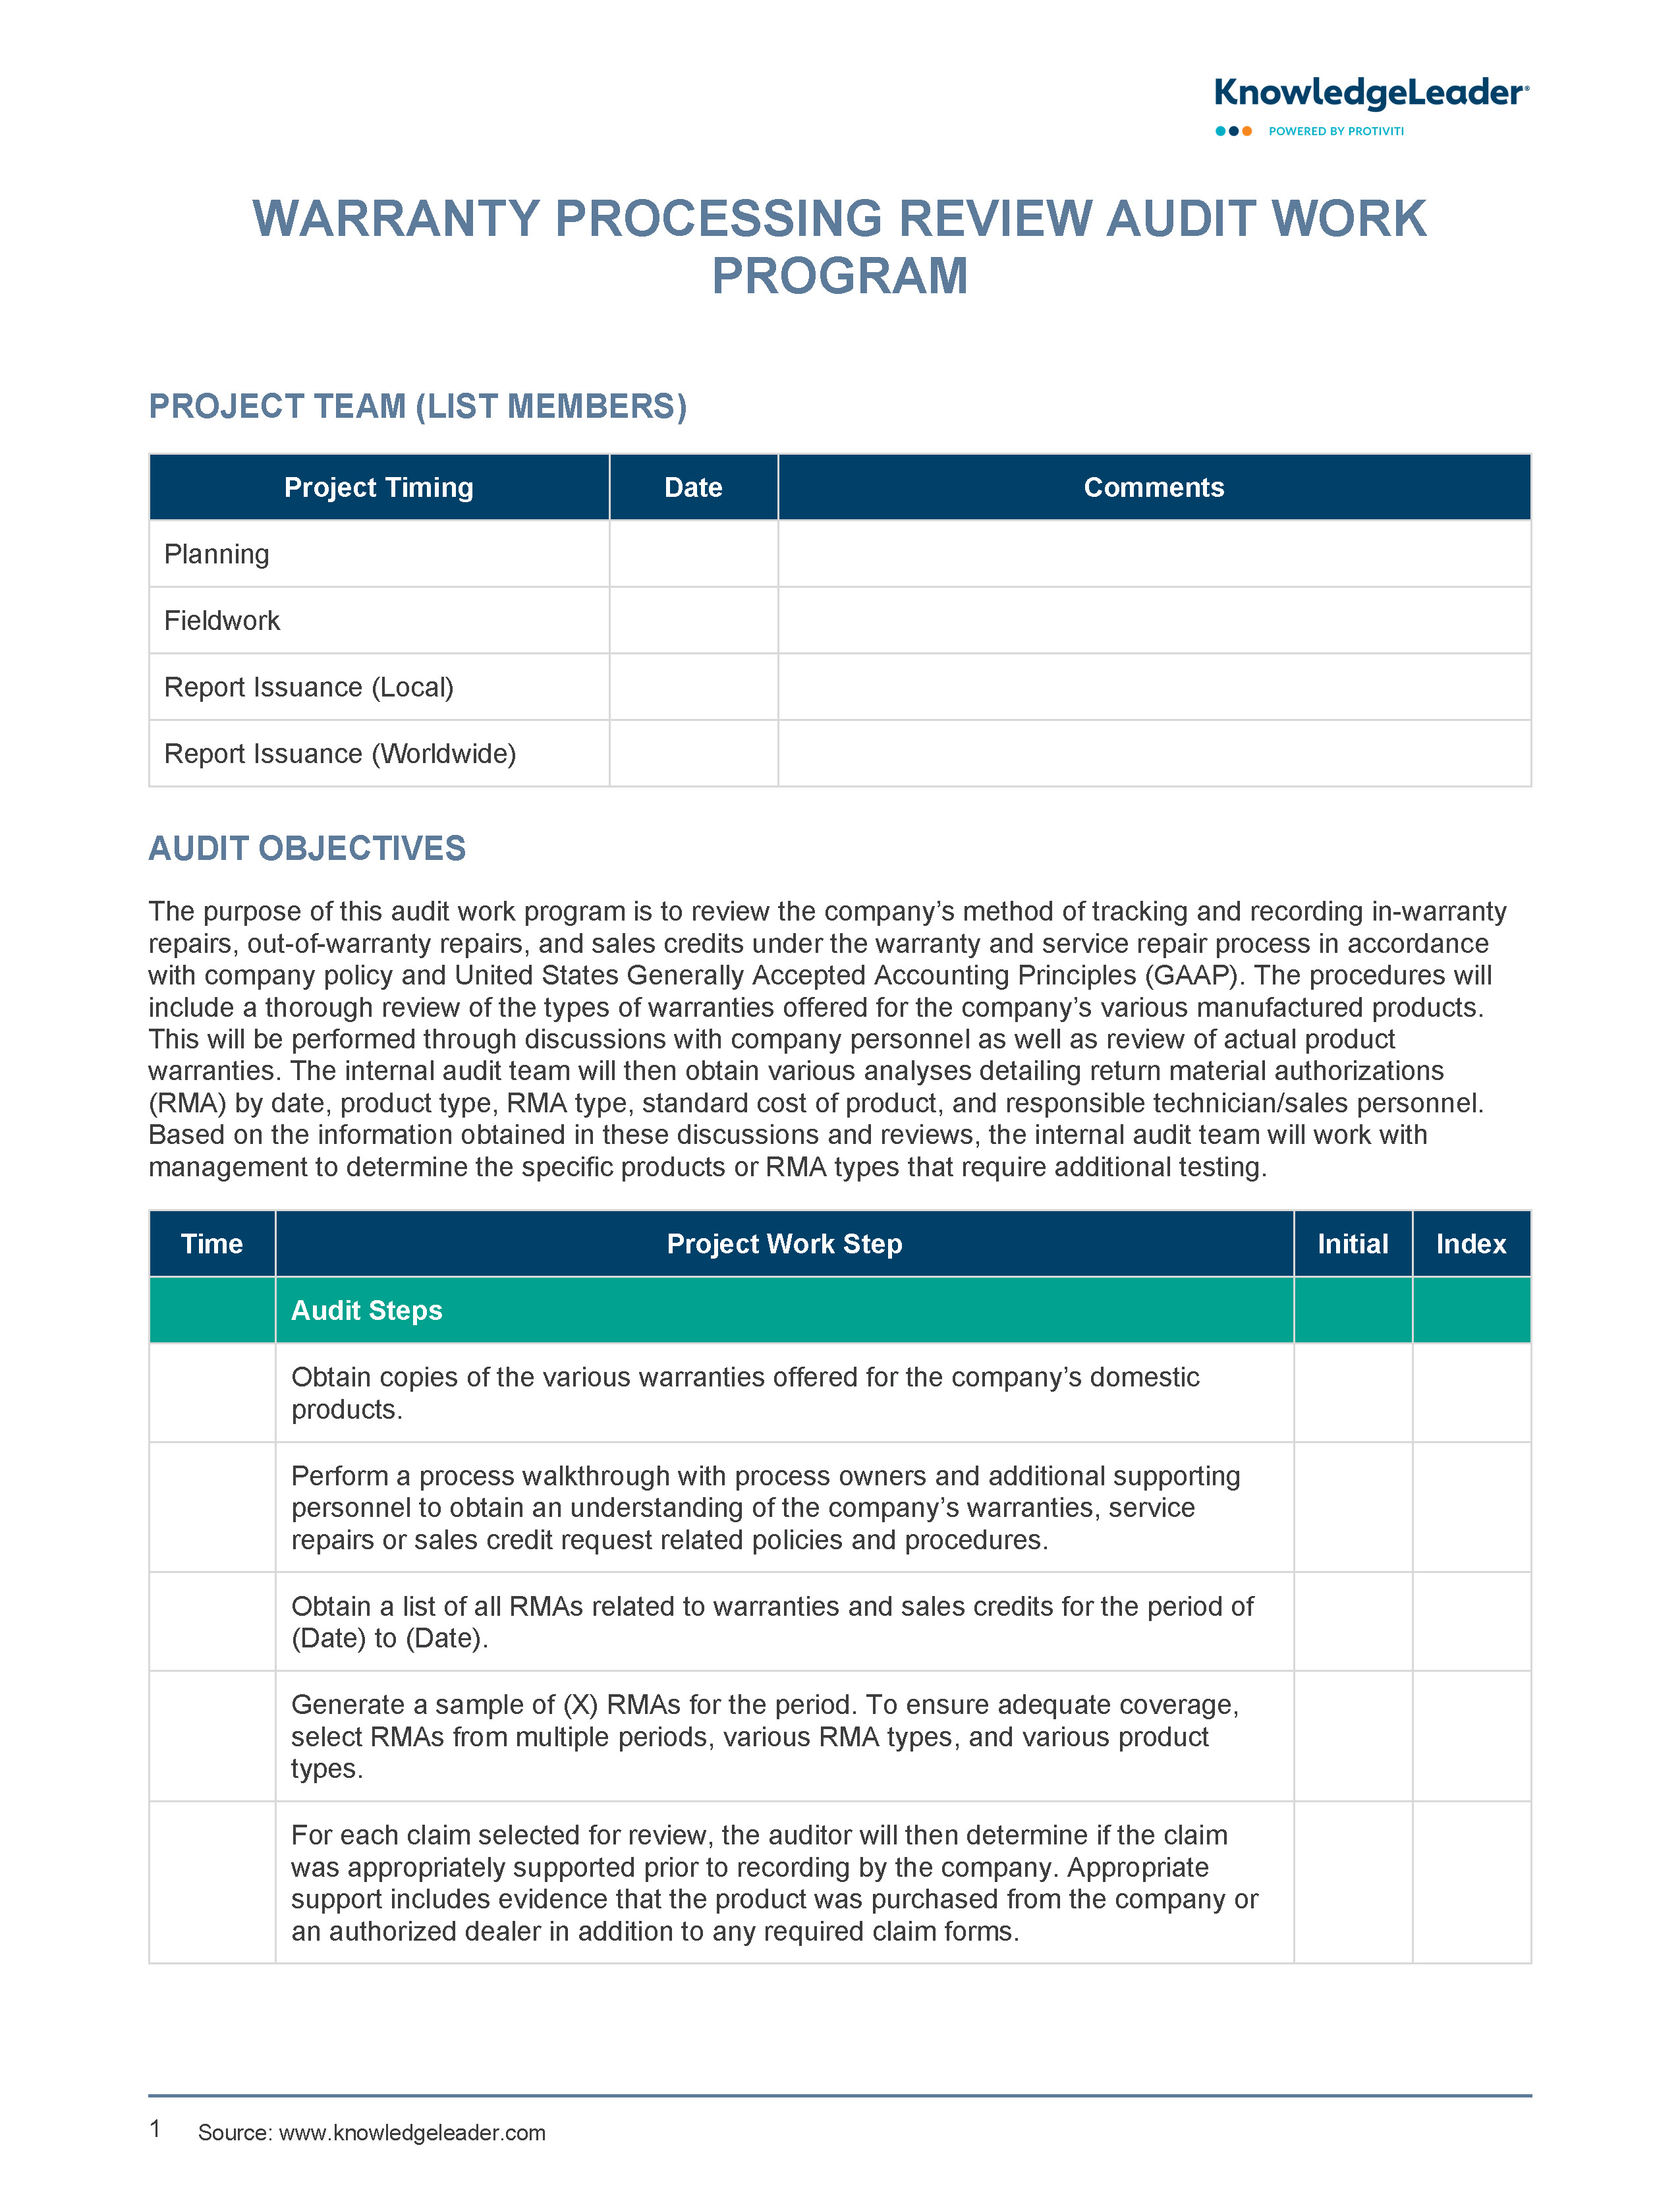 Screenshot of the first page of Warranty Processing Review Audit Work Program